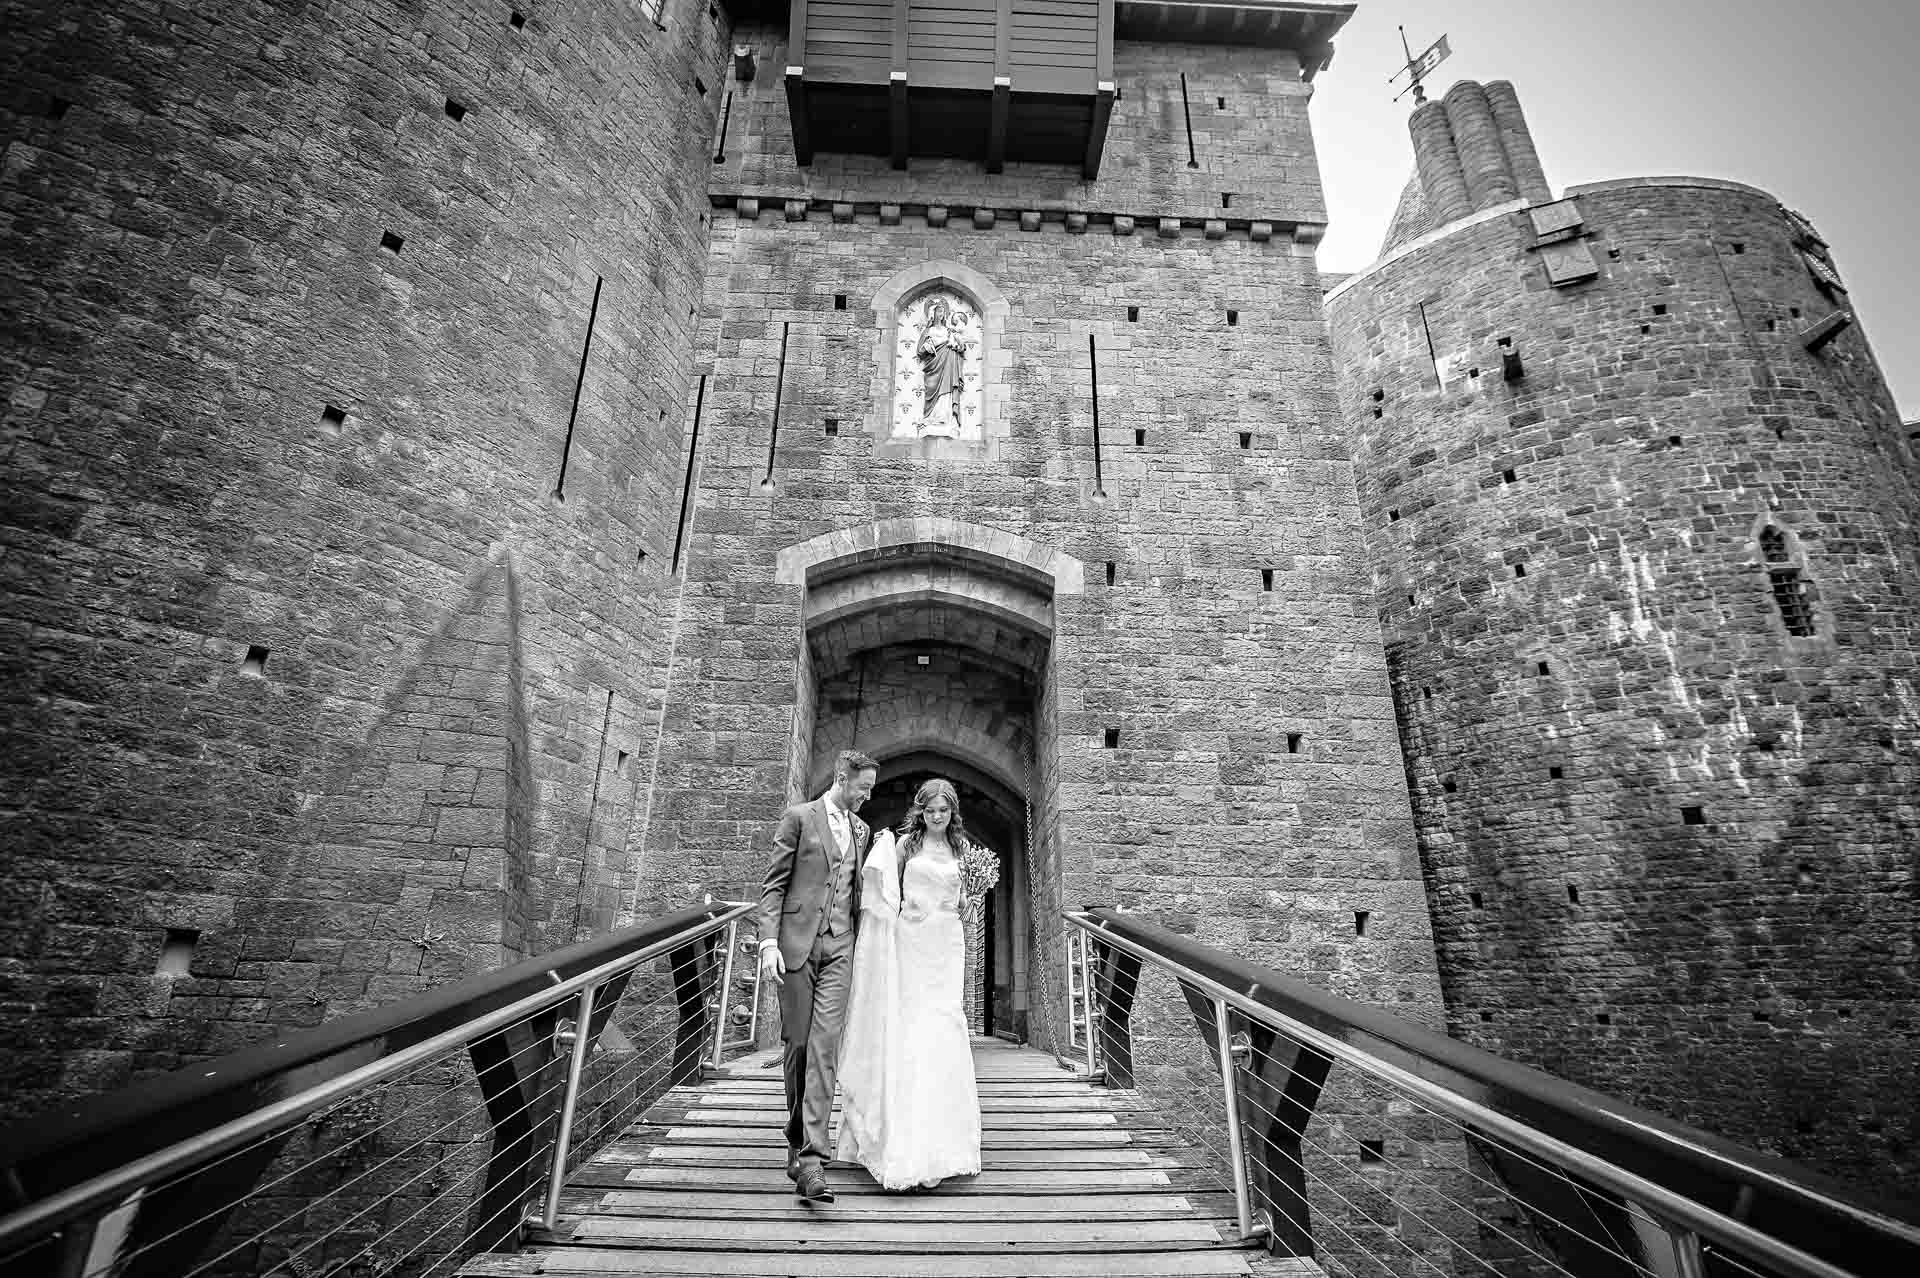 The newly-weds descend the drawbridge at Castell Coch wedding